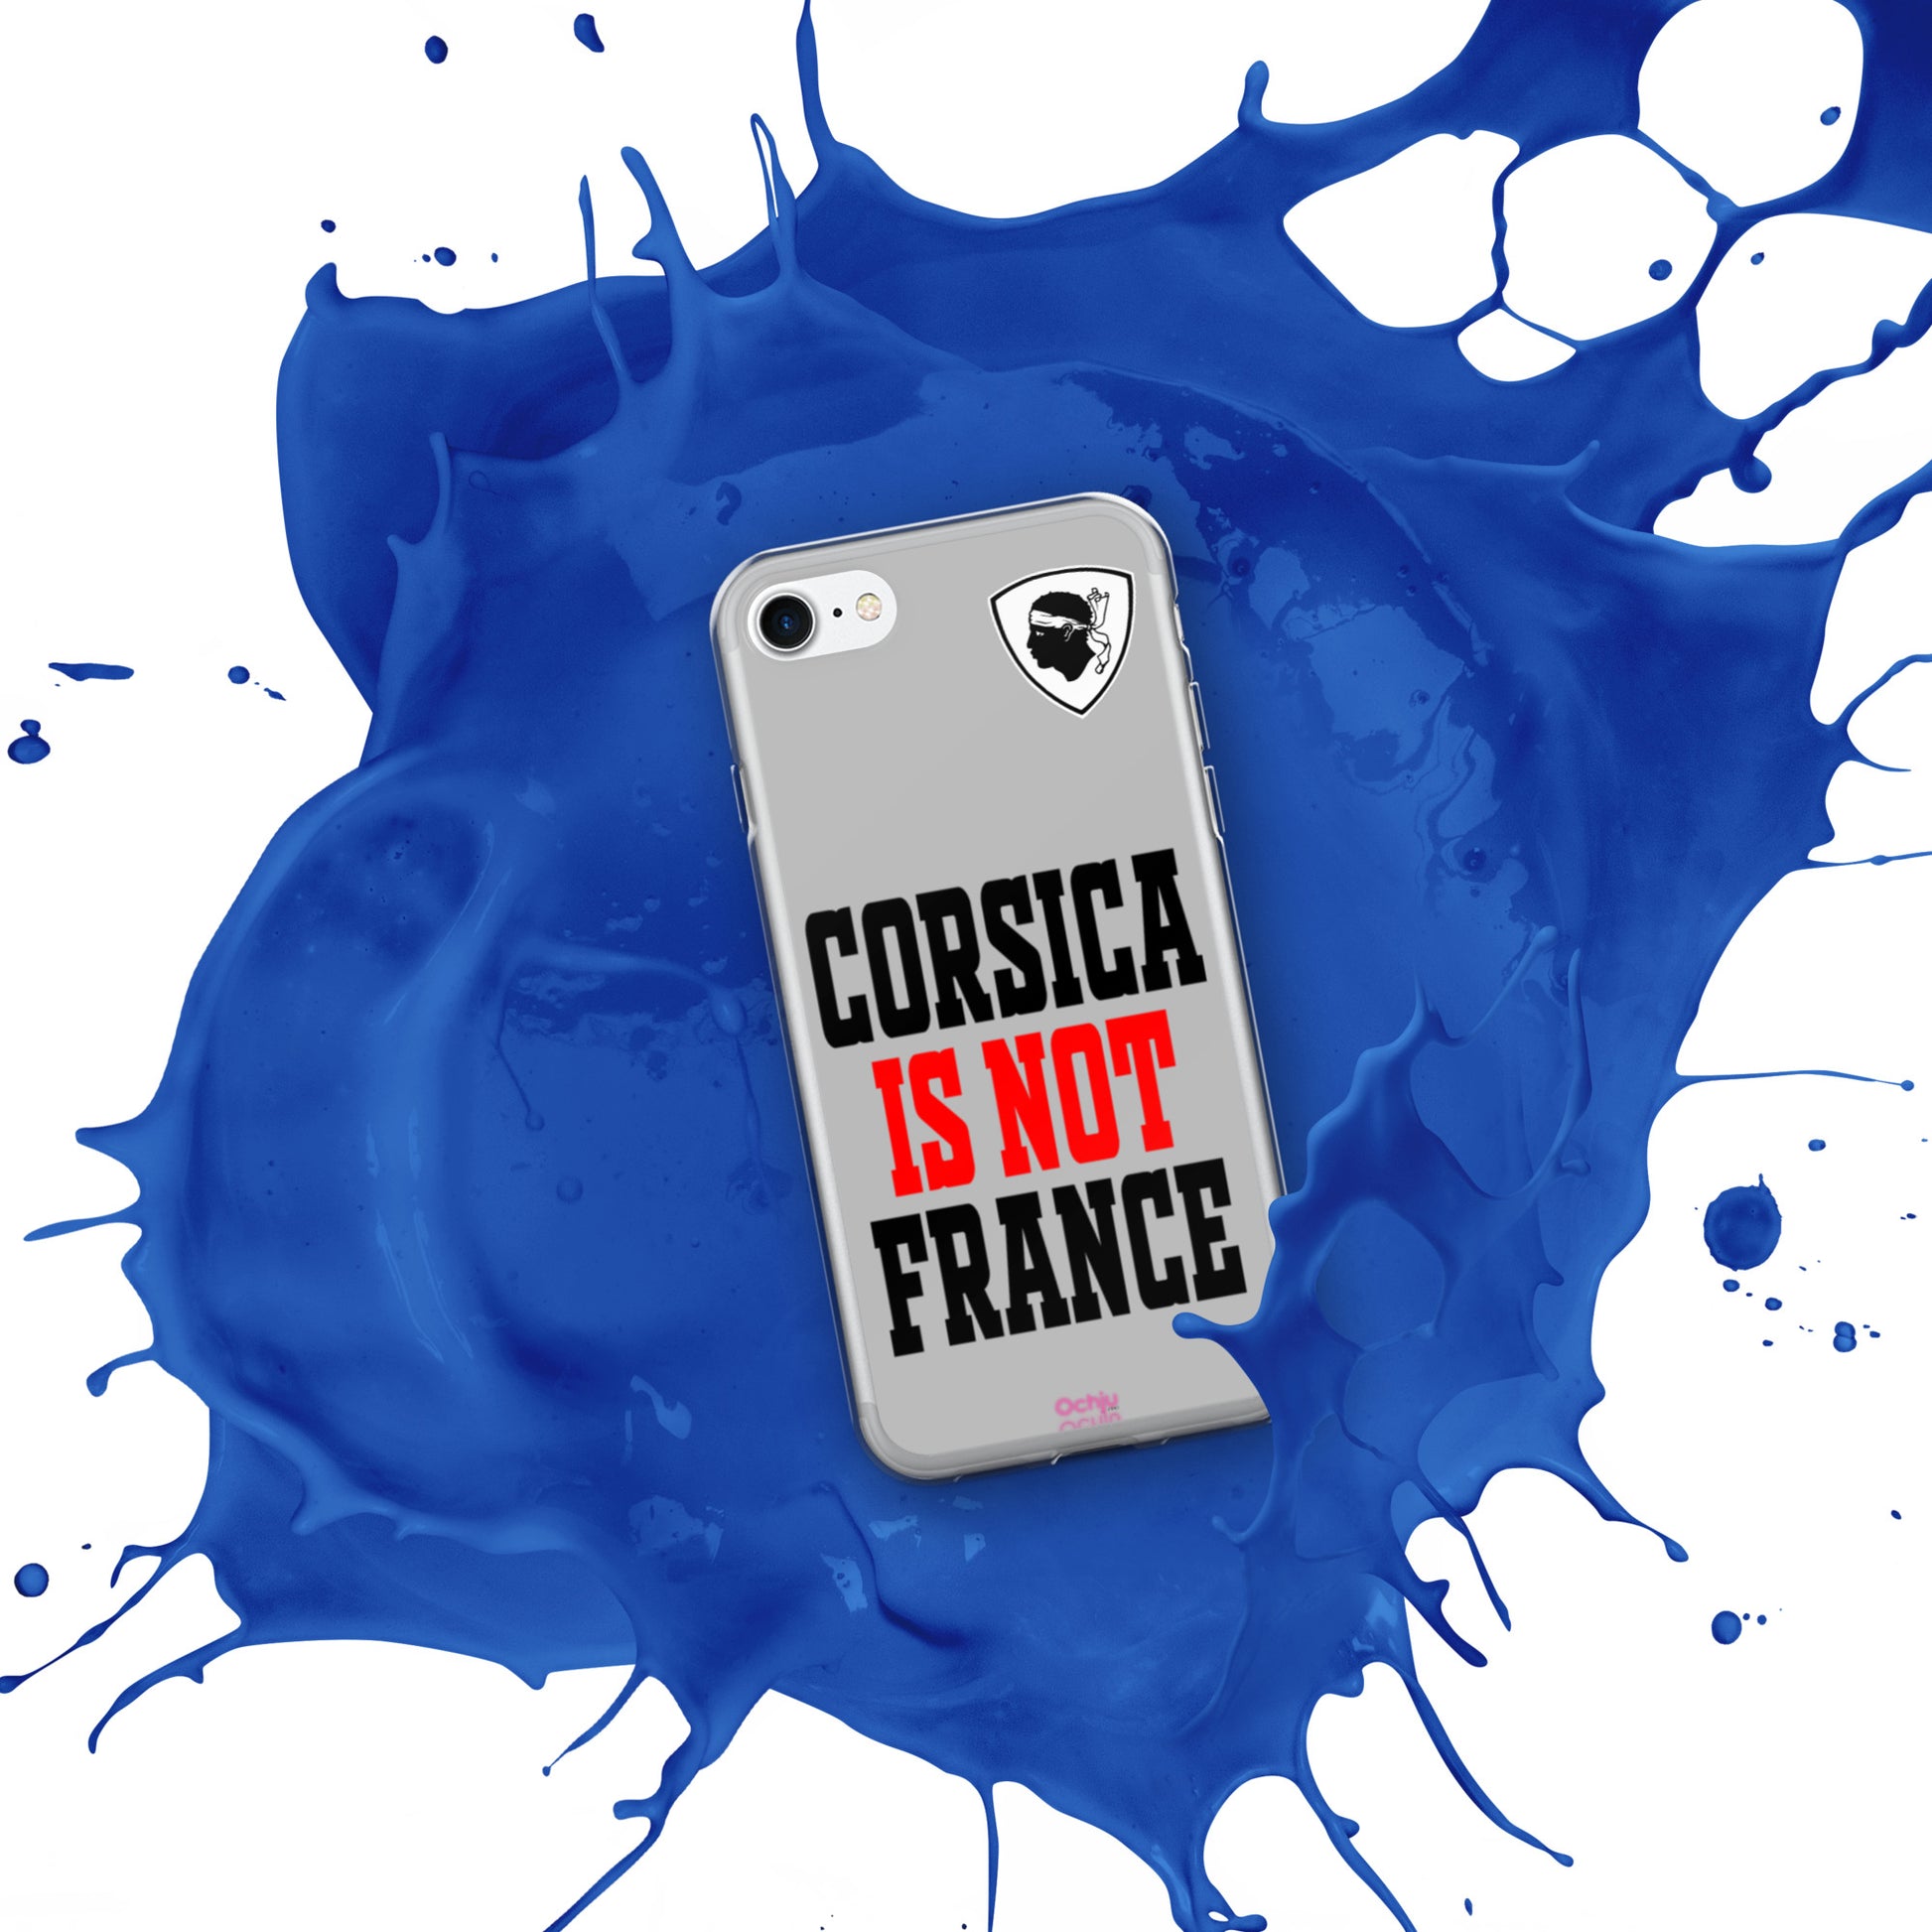 Coque pour iPhone Corsica is not France - Ochju Ochju iPhone SE Ochju Coque pour iPhone Corsica is not France